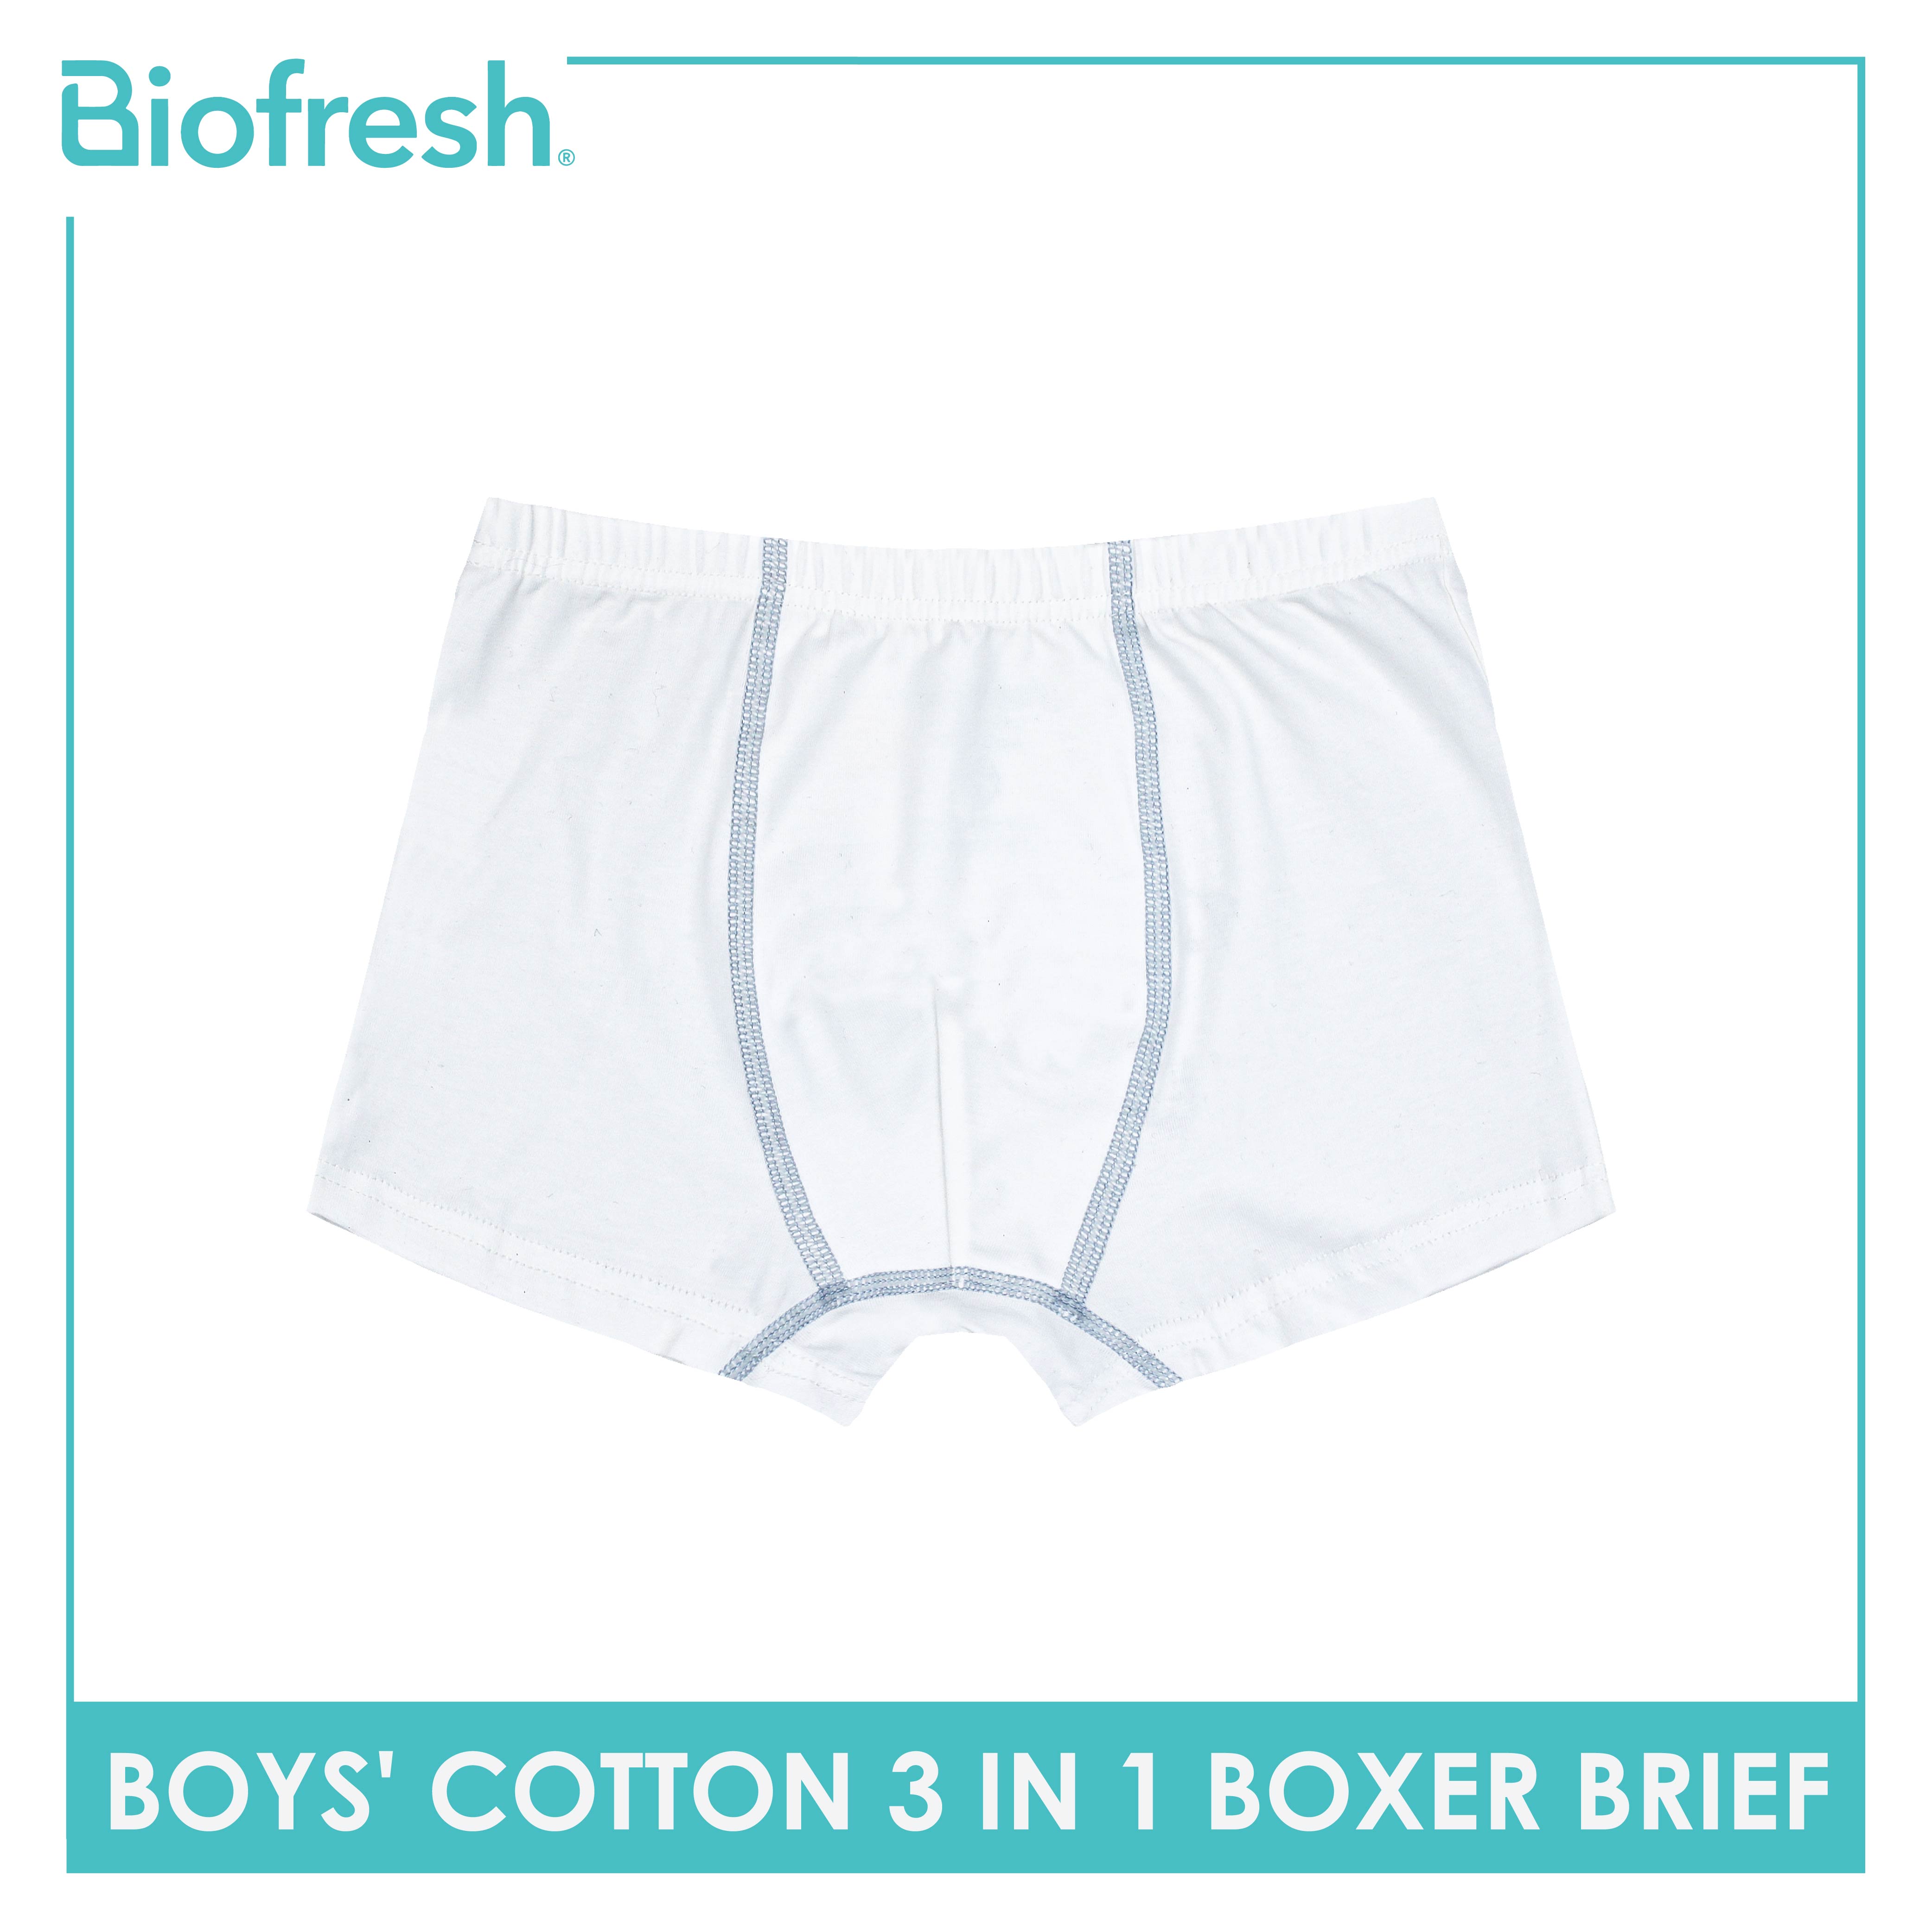 Biofresh Boys' Antimicrobial Seamless Boxer Brief 3 pieces in a